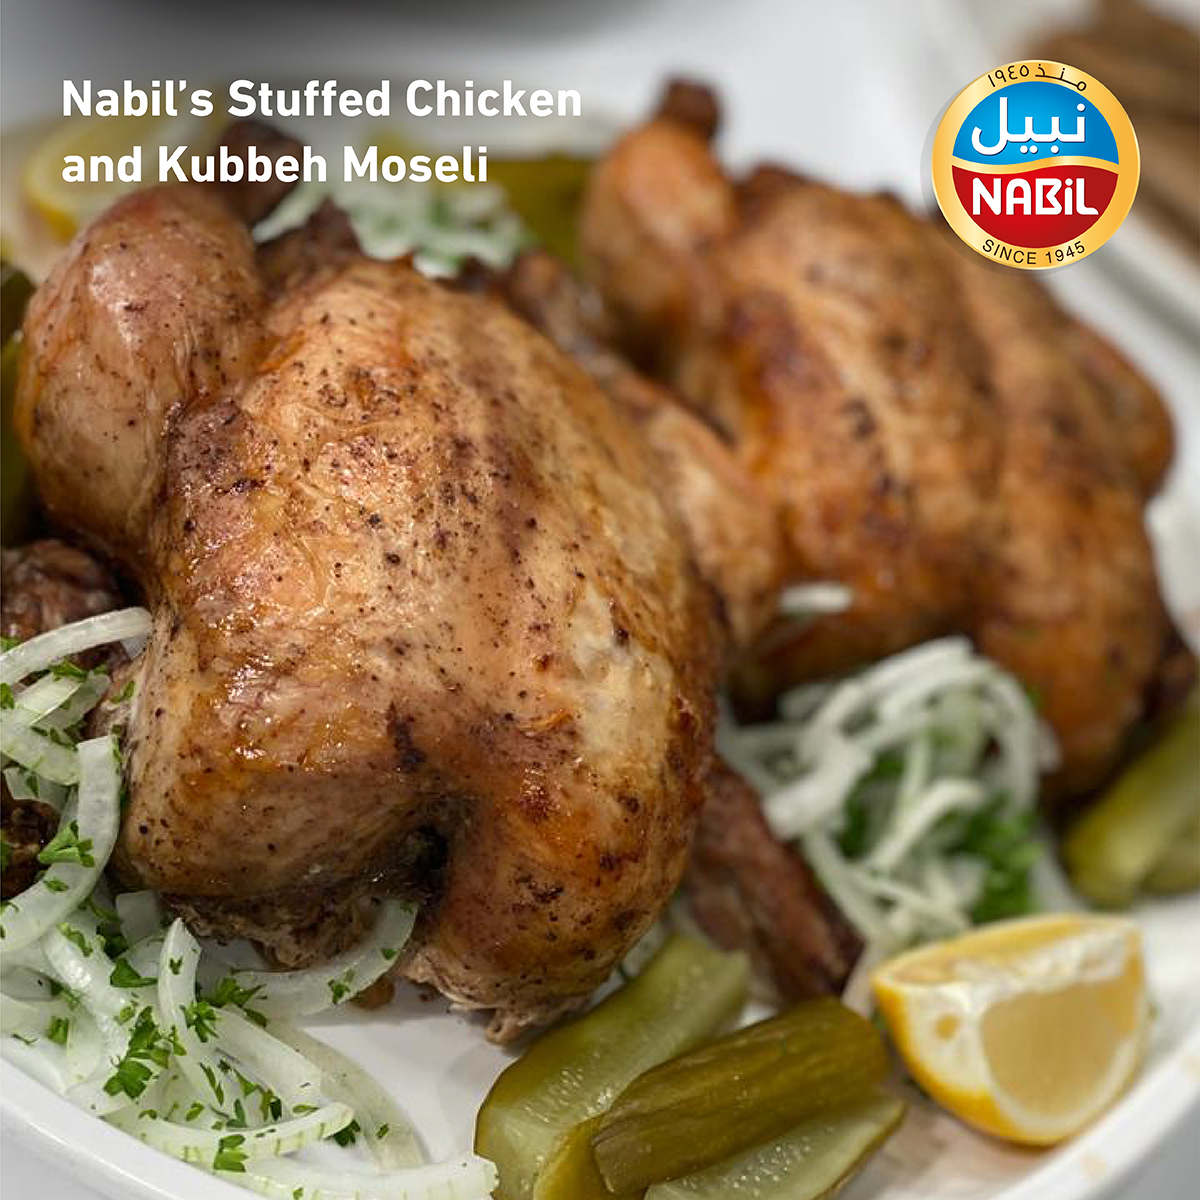 Stuffed Chicken and Kubbeh Mosul from Nabil - Nabil Foods Nabil 